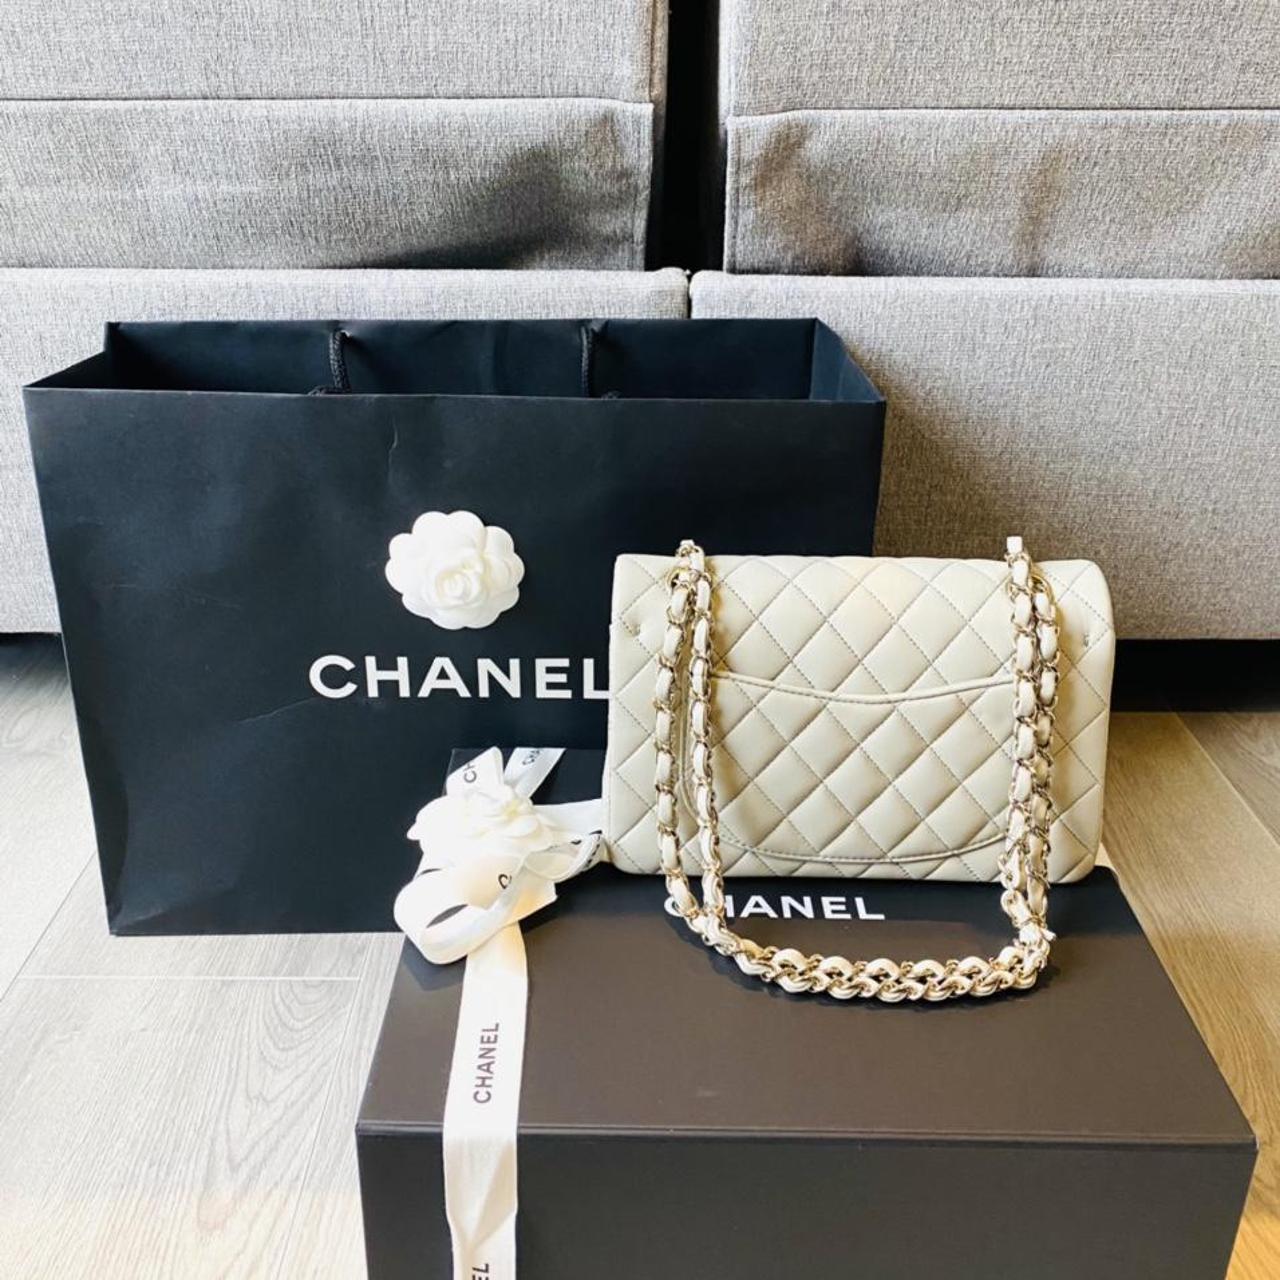 Chanel Women's Cream and Gold Bag (2)